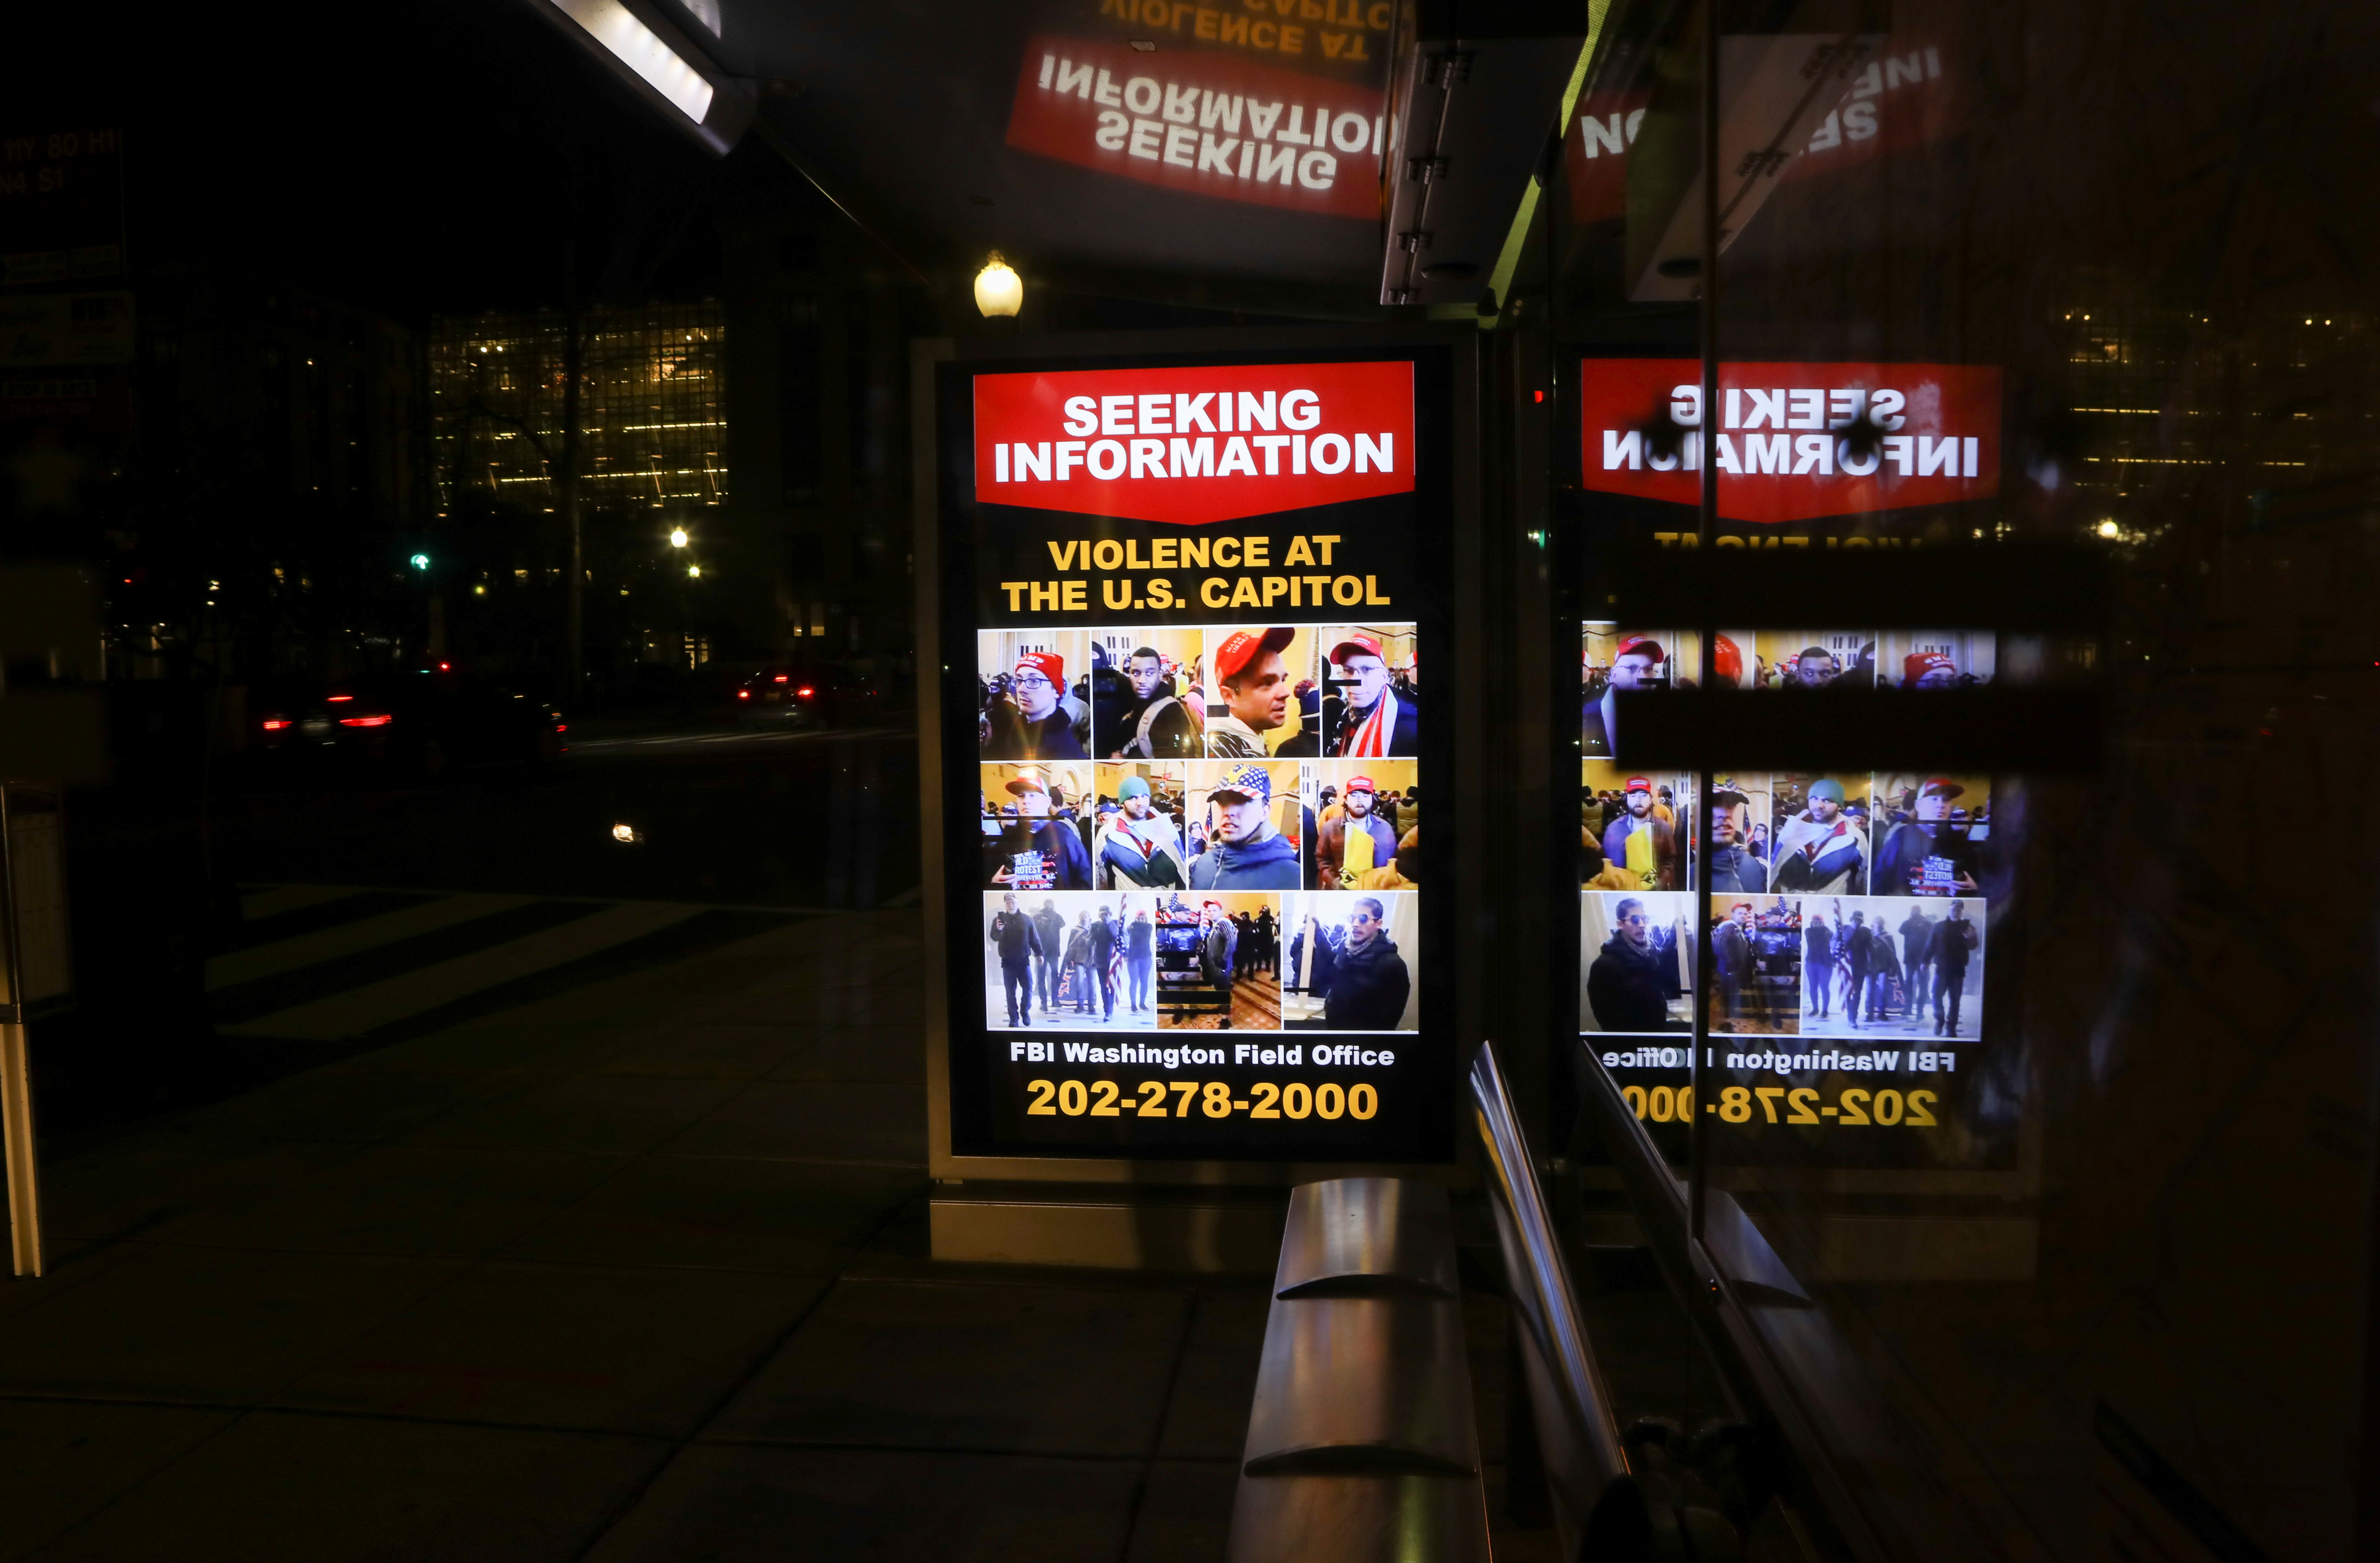 A sign at a bus stop shows people wanted by law enforcement, three days after a protest of the U.S. Congress certification of the November election results the 2020 election in Washington